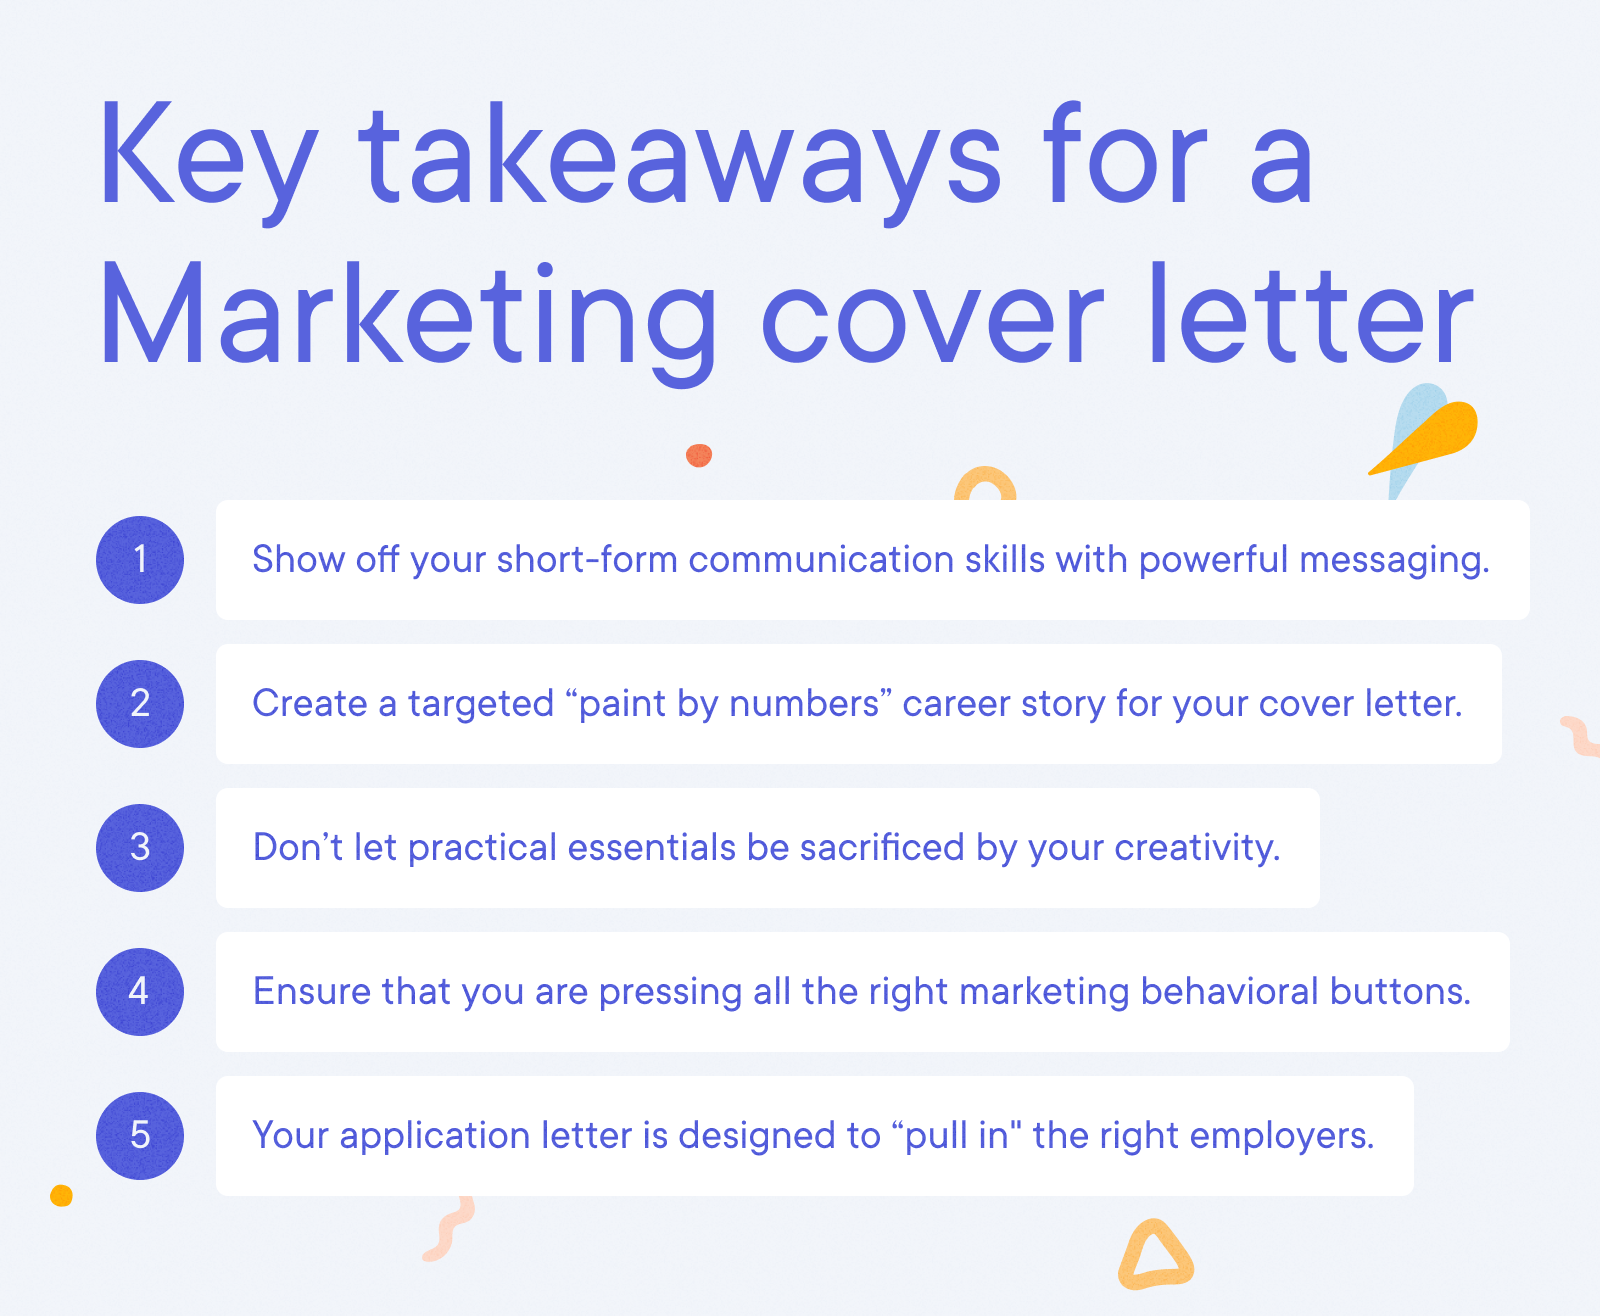 Marketing Sample Cover Letter Example - Key takeaways for a marketing cover letter